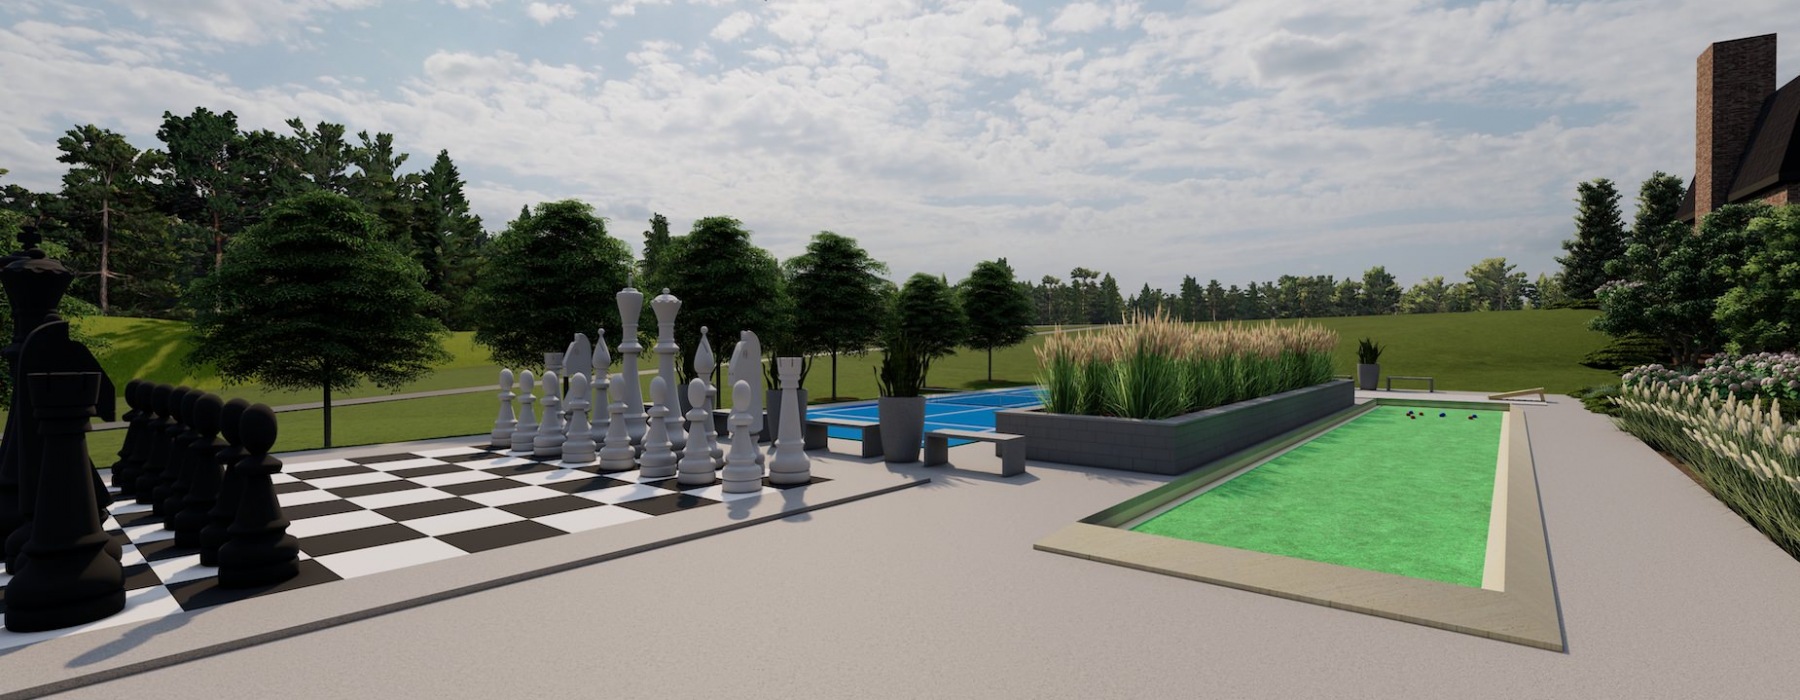 community outdoor amenity area with giant chessboard